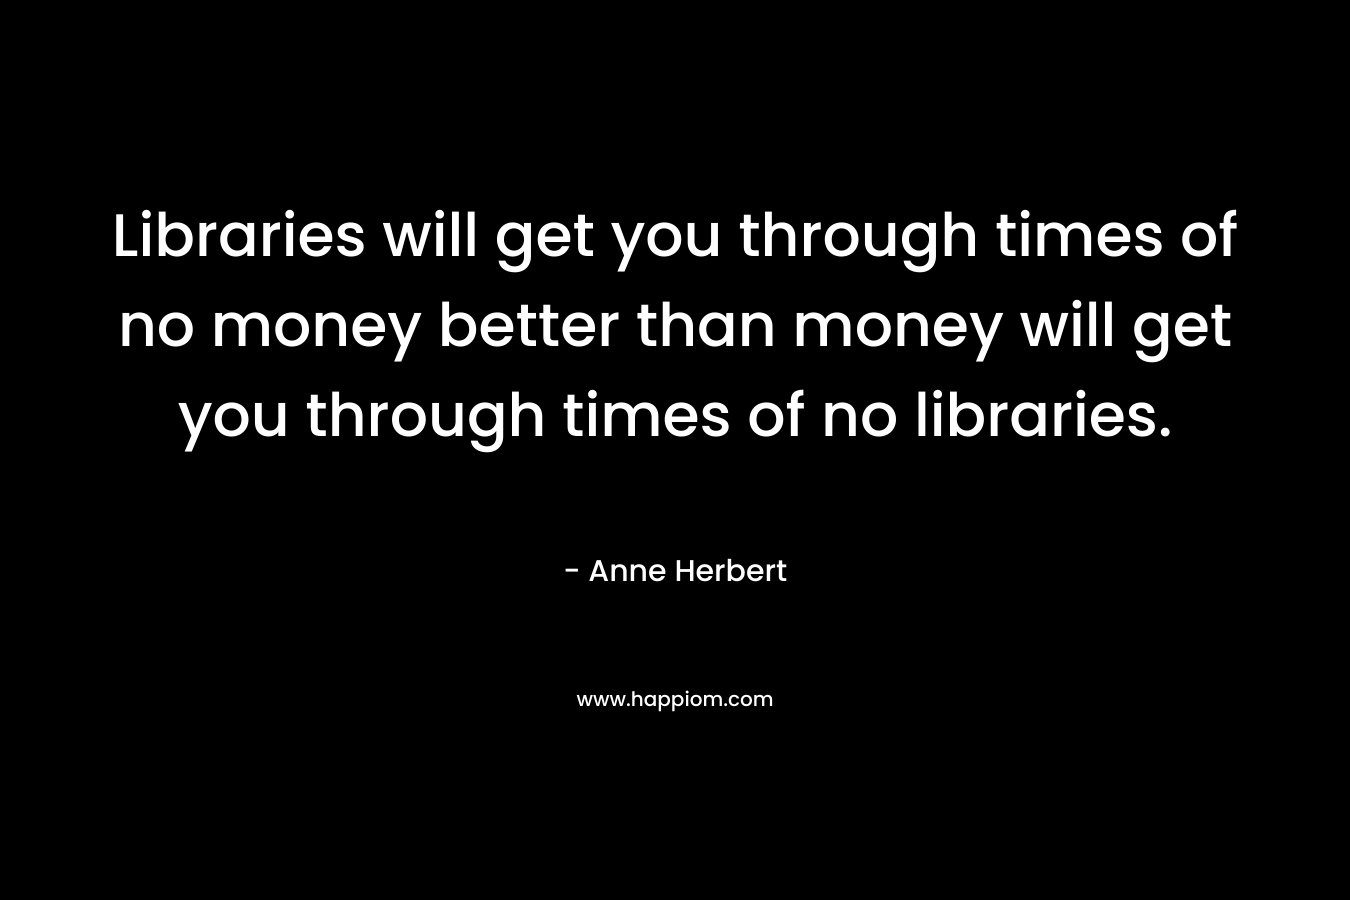 Libraries will get you through times of no money better than money will get you through times of no libraries. – Anne Herbert